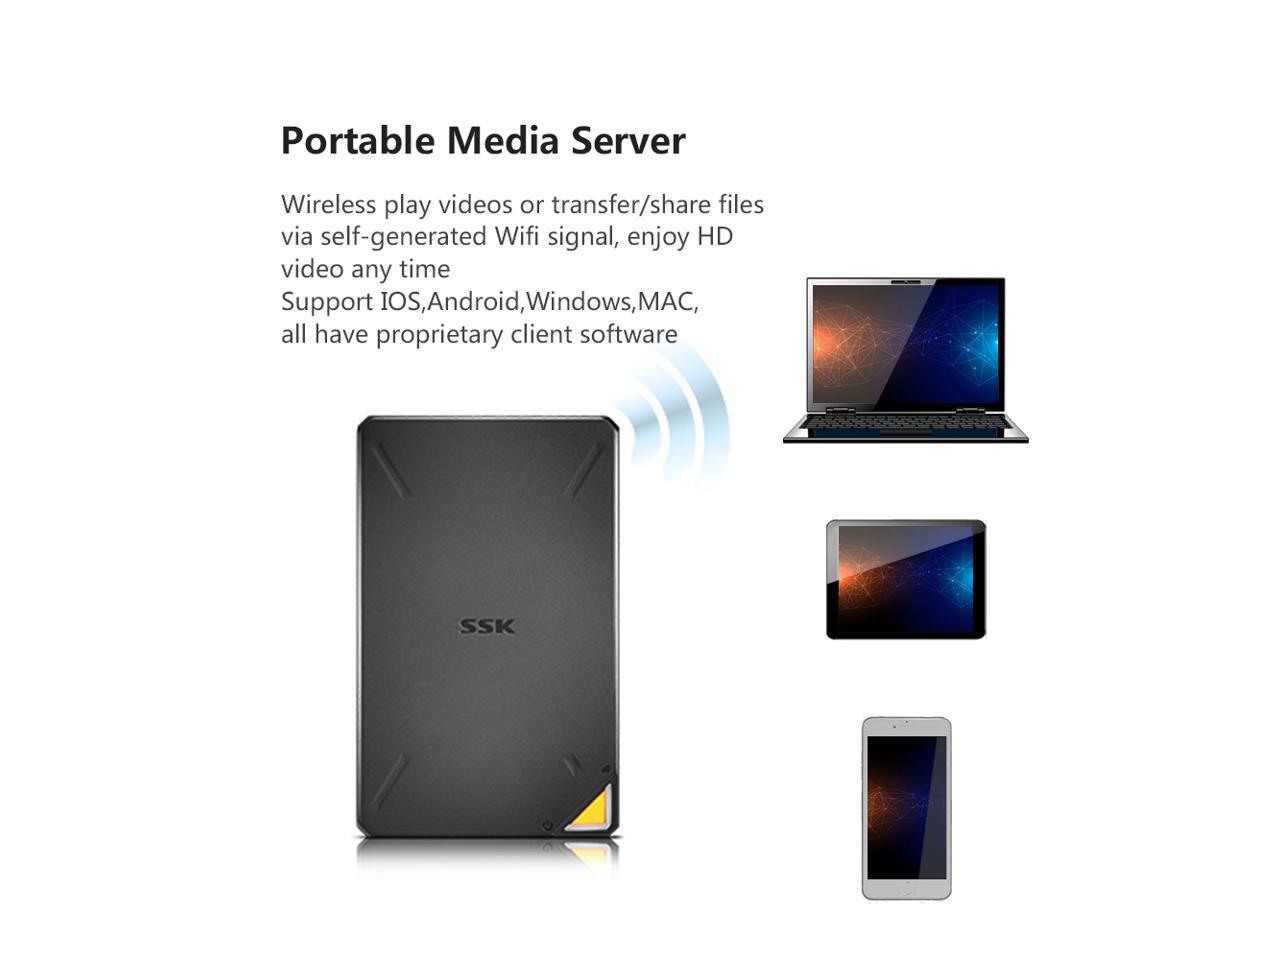 Bundles SSK 4TB Personal Cloud Network Attached Storage Support Auto-Backup,Home Office Storage NAS and SSK 2TB Portable NAS External Wireless Hard Drive with Own Wi-Fi Hotspot 